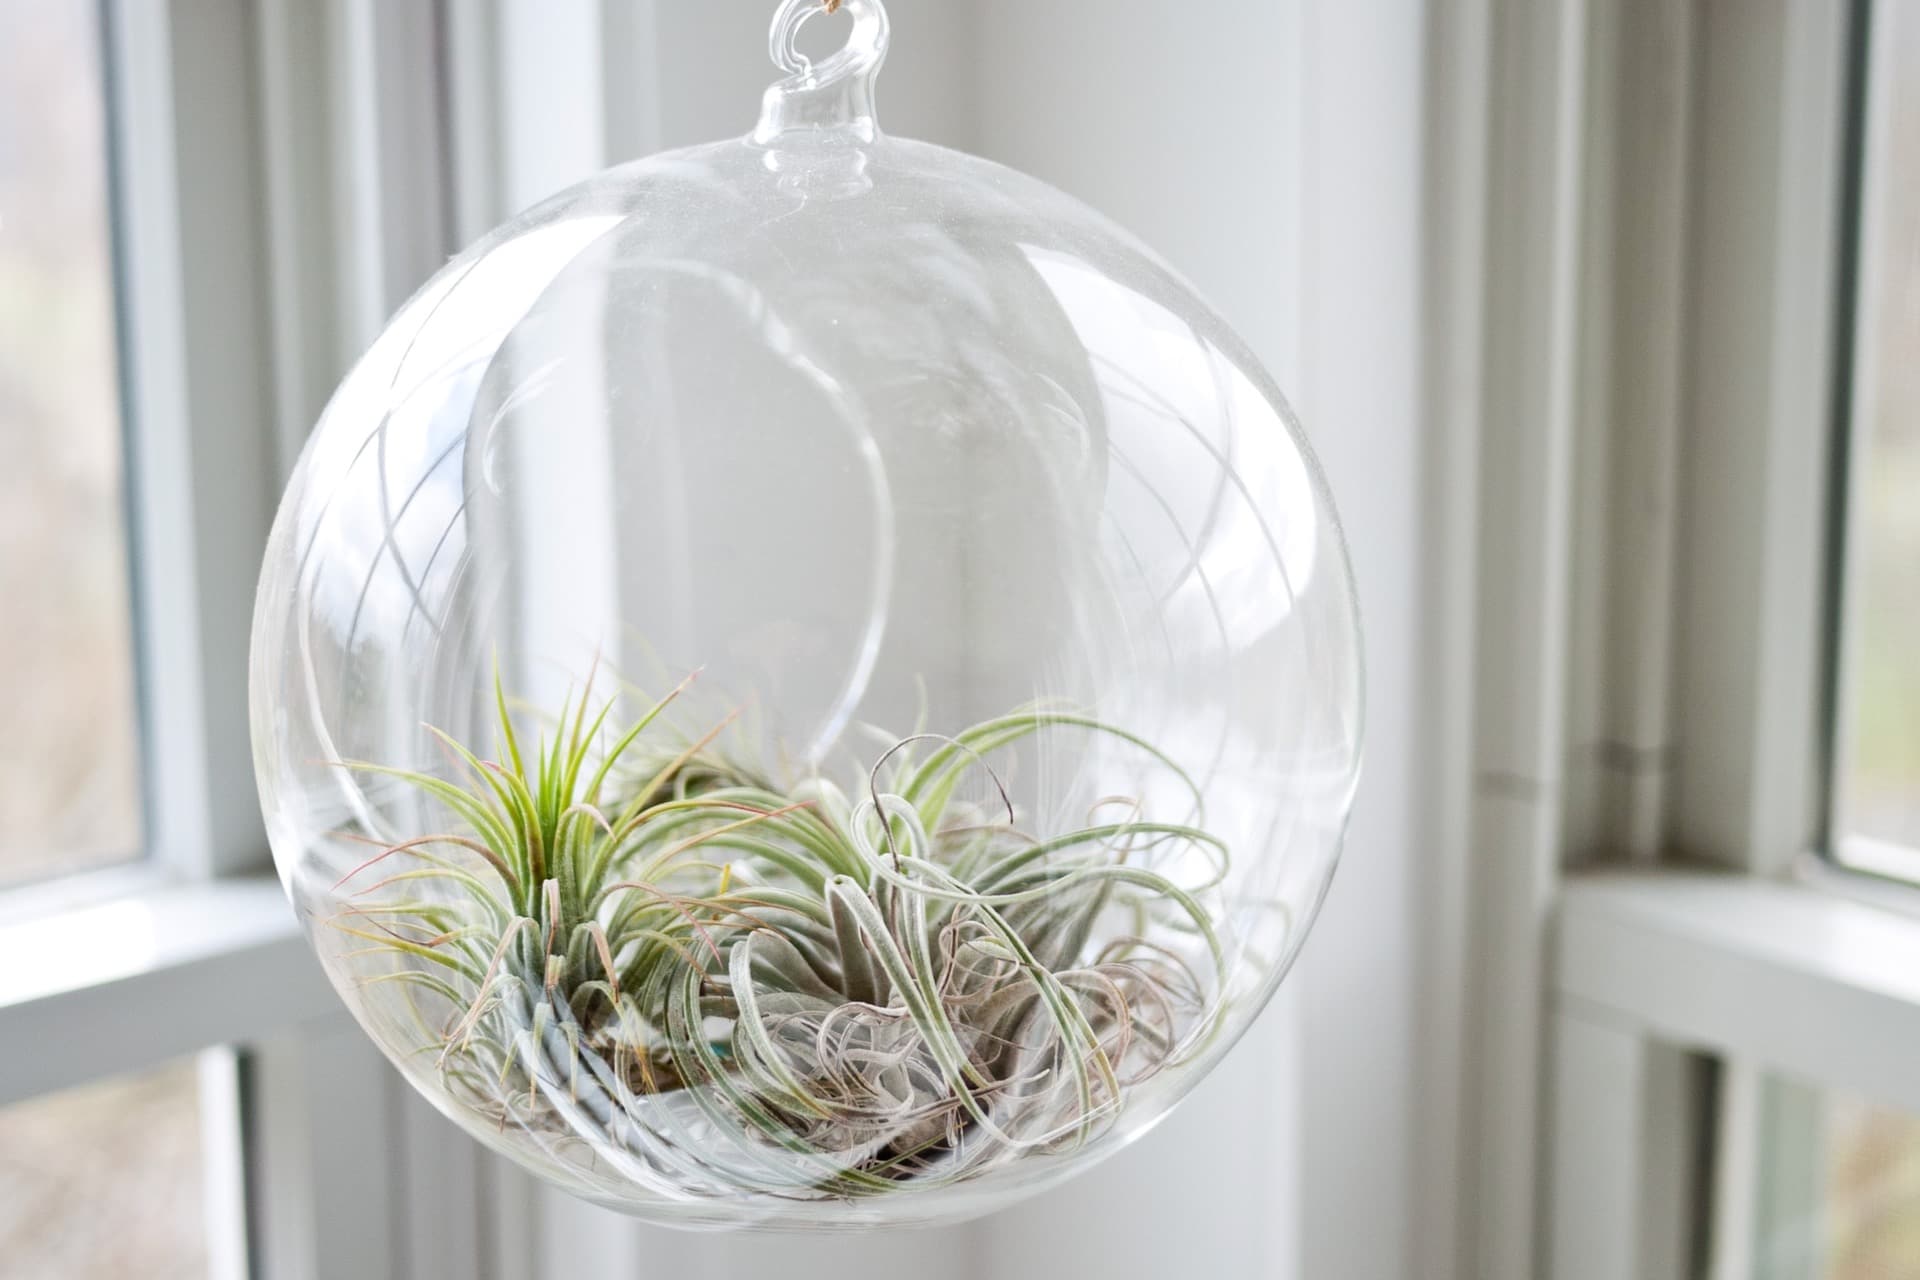 How to Water Air Plants